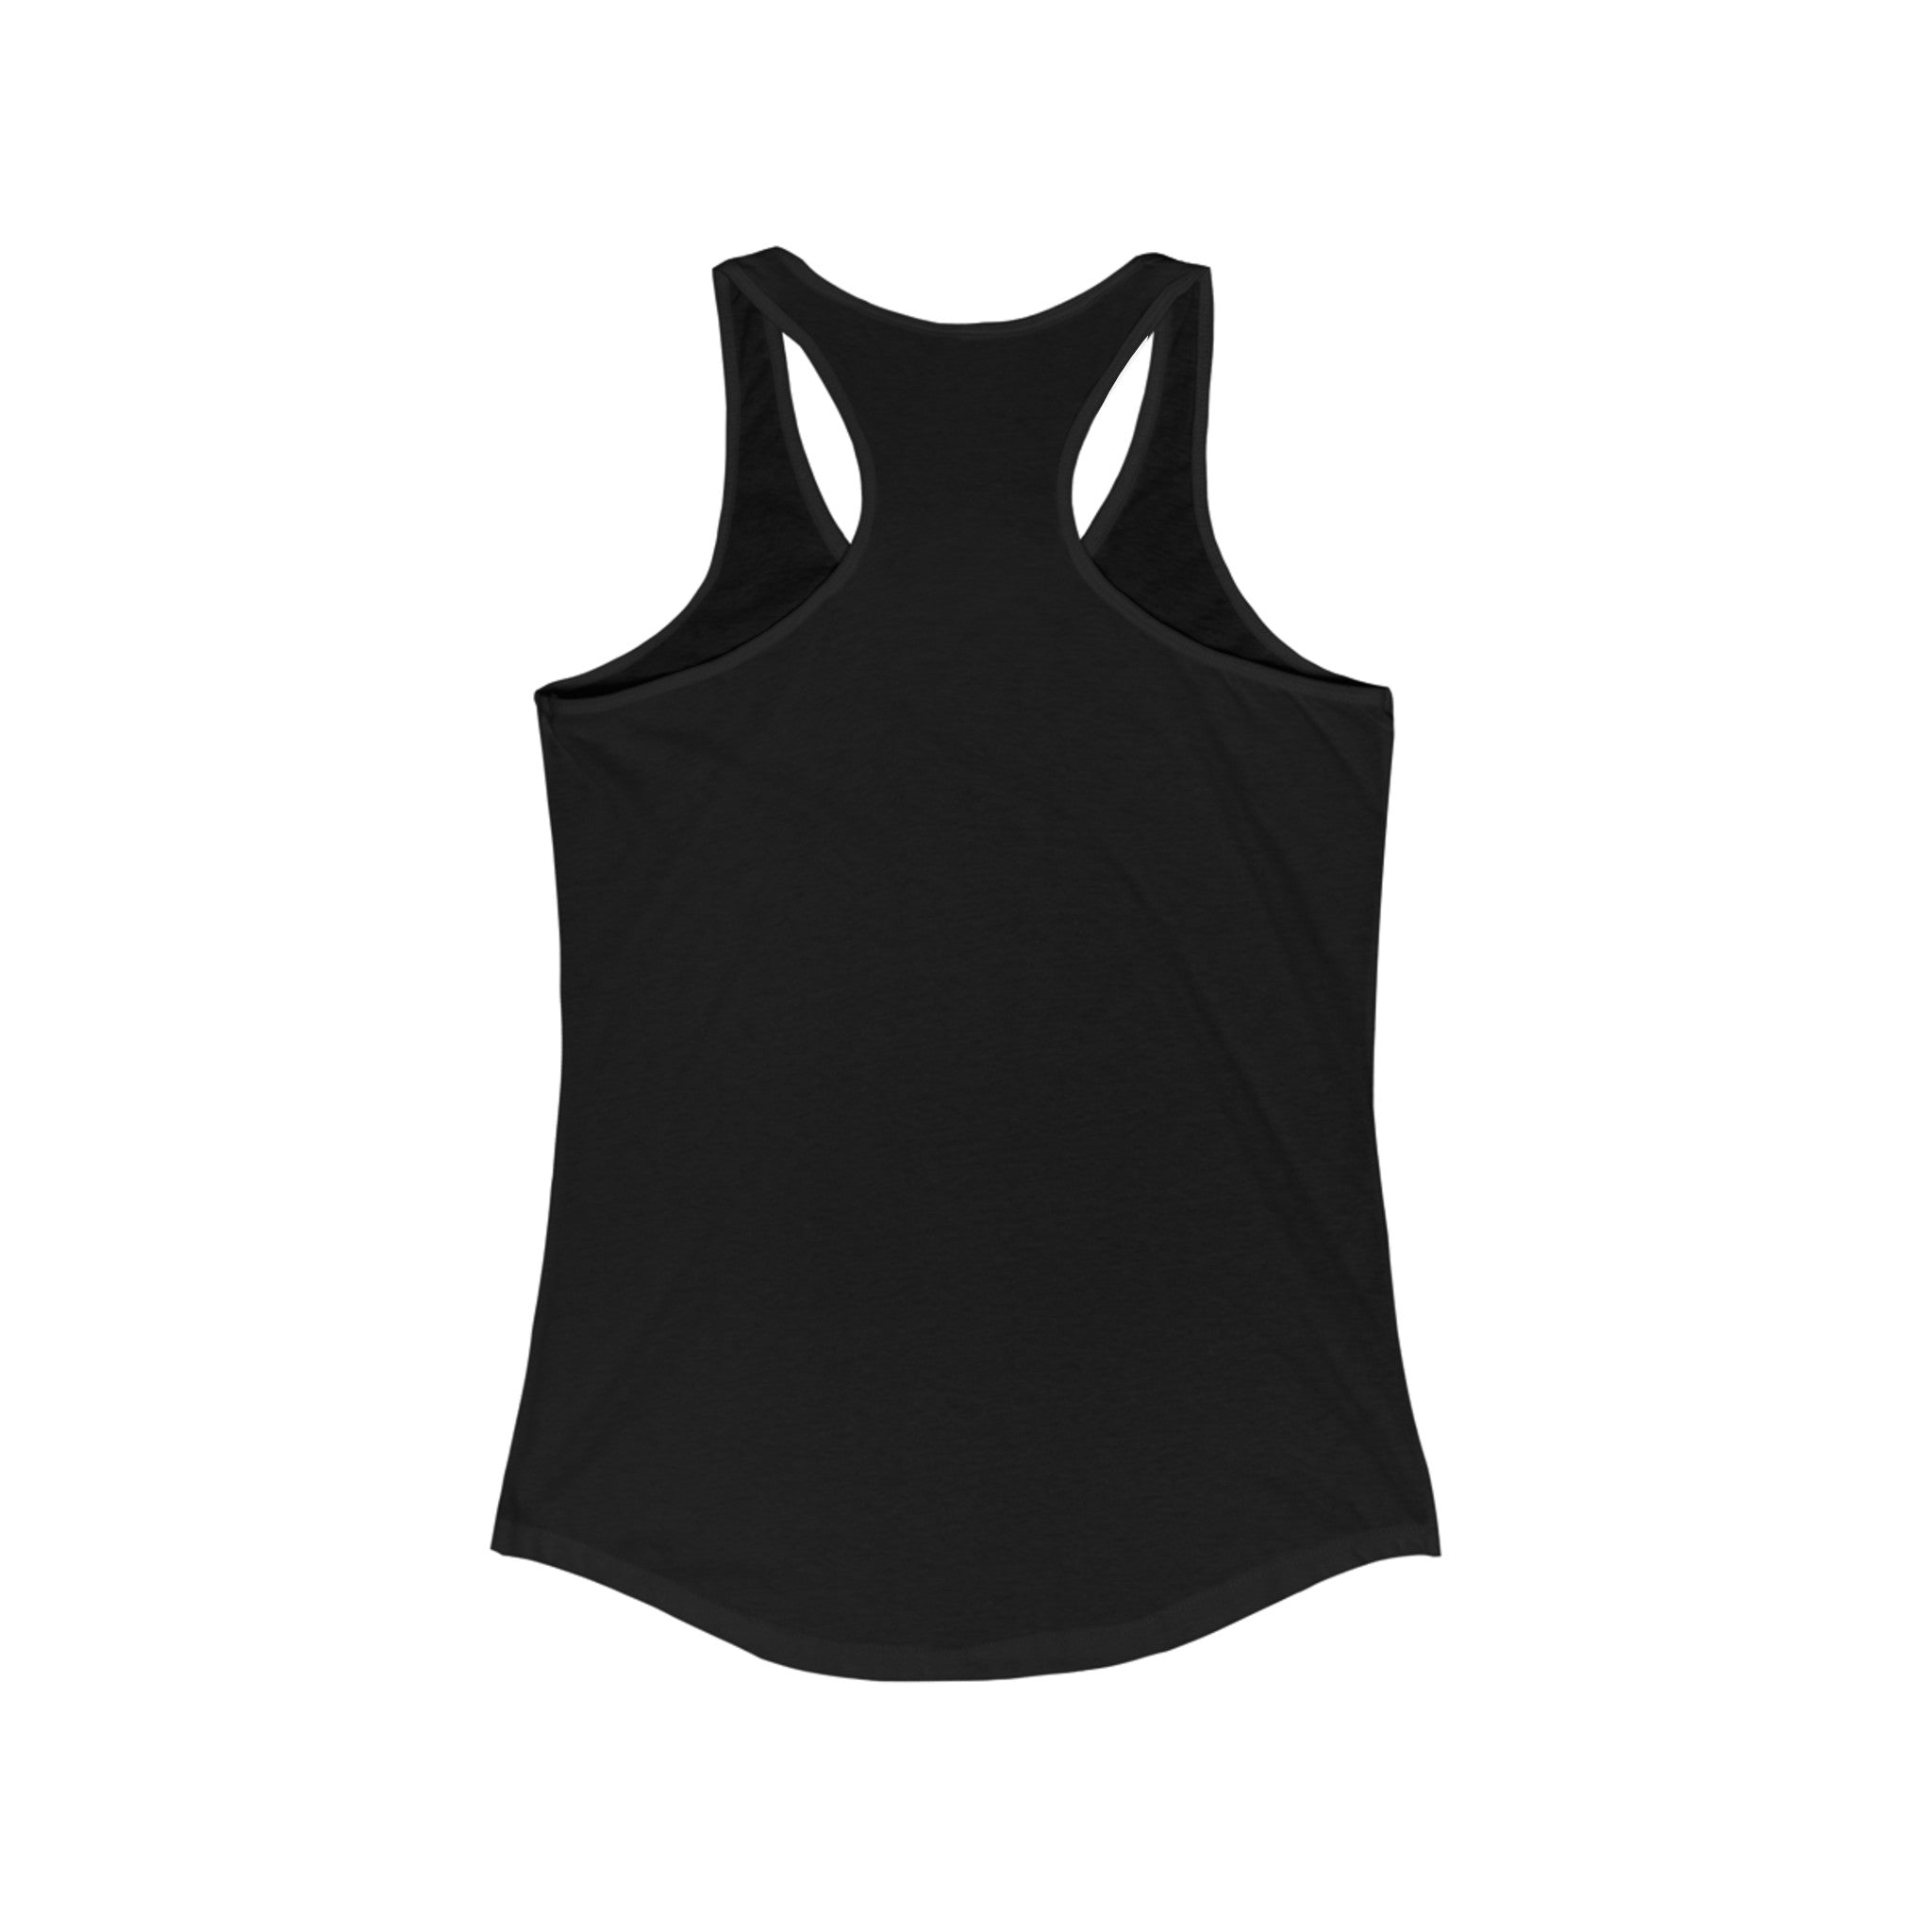 A Cu-Te - Women's Racerback Tank in sleek black, perfect for an active lifestyle. This tank features a scoop neckline, curved hem, and a plain design that's as comfortable as it is stylish when viewed from the back.